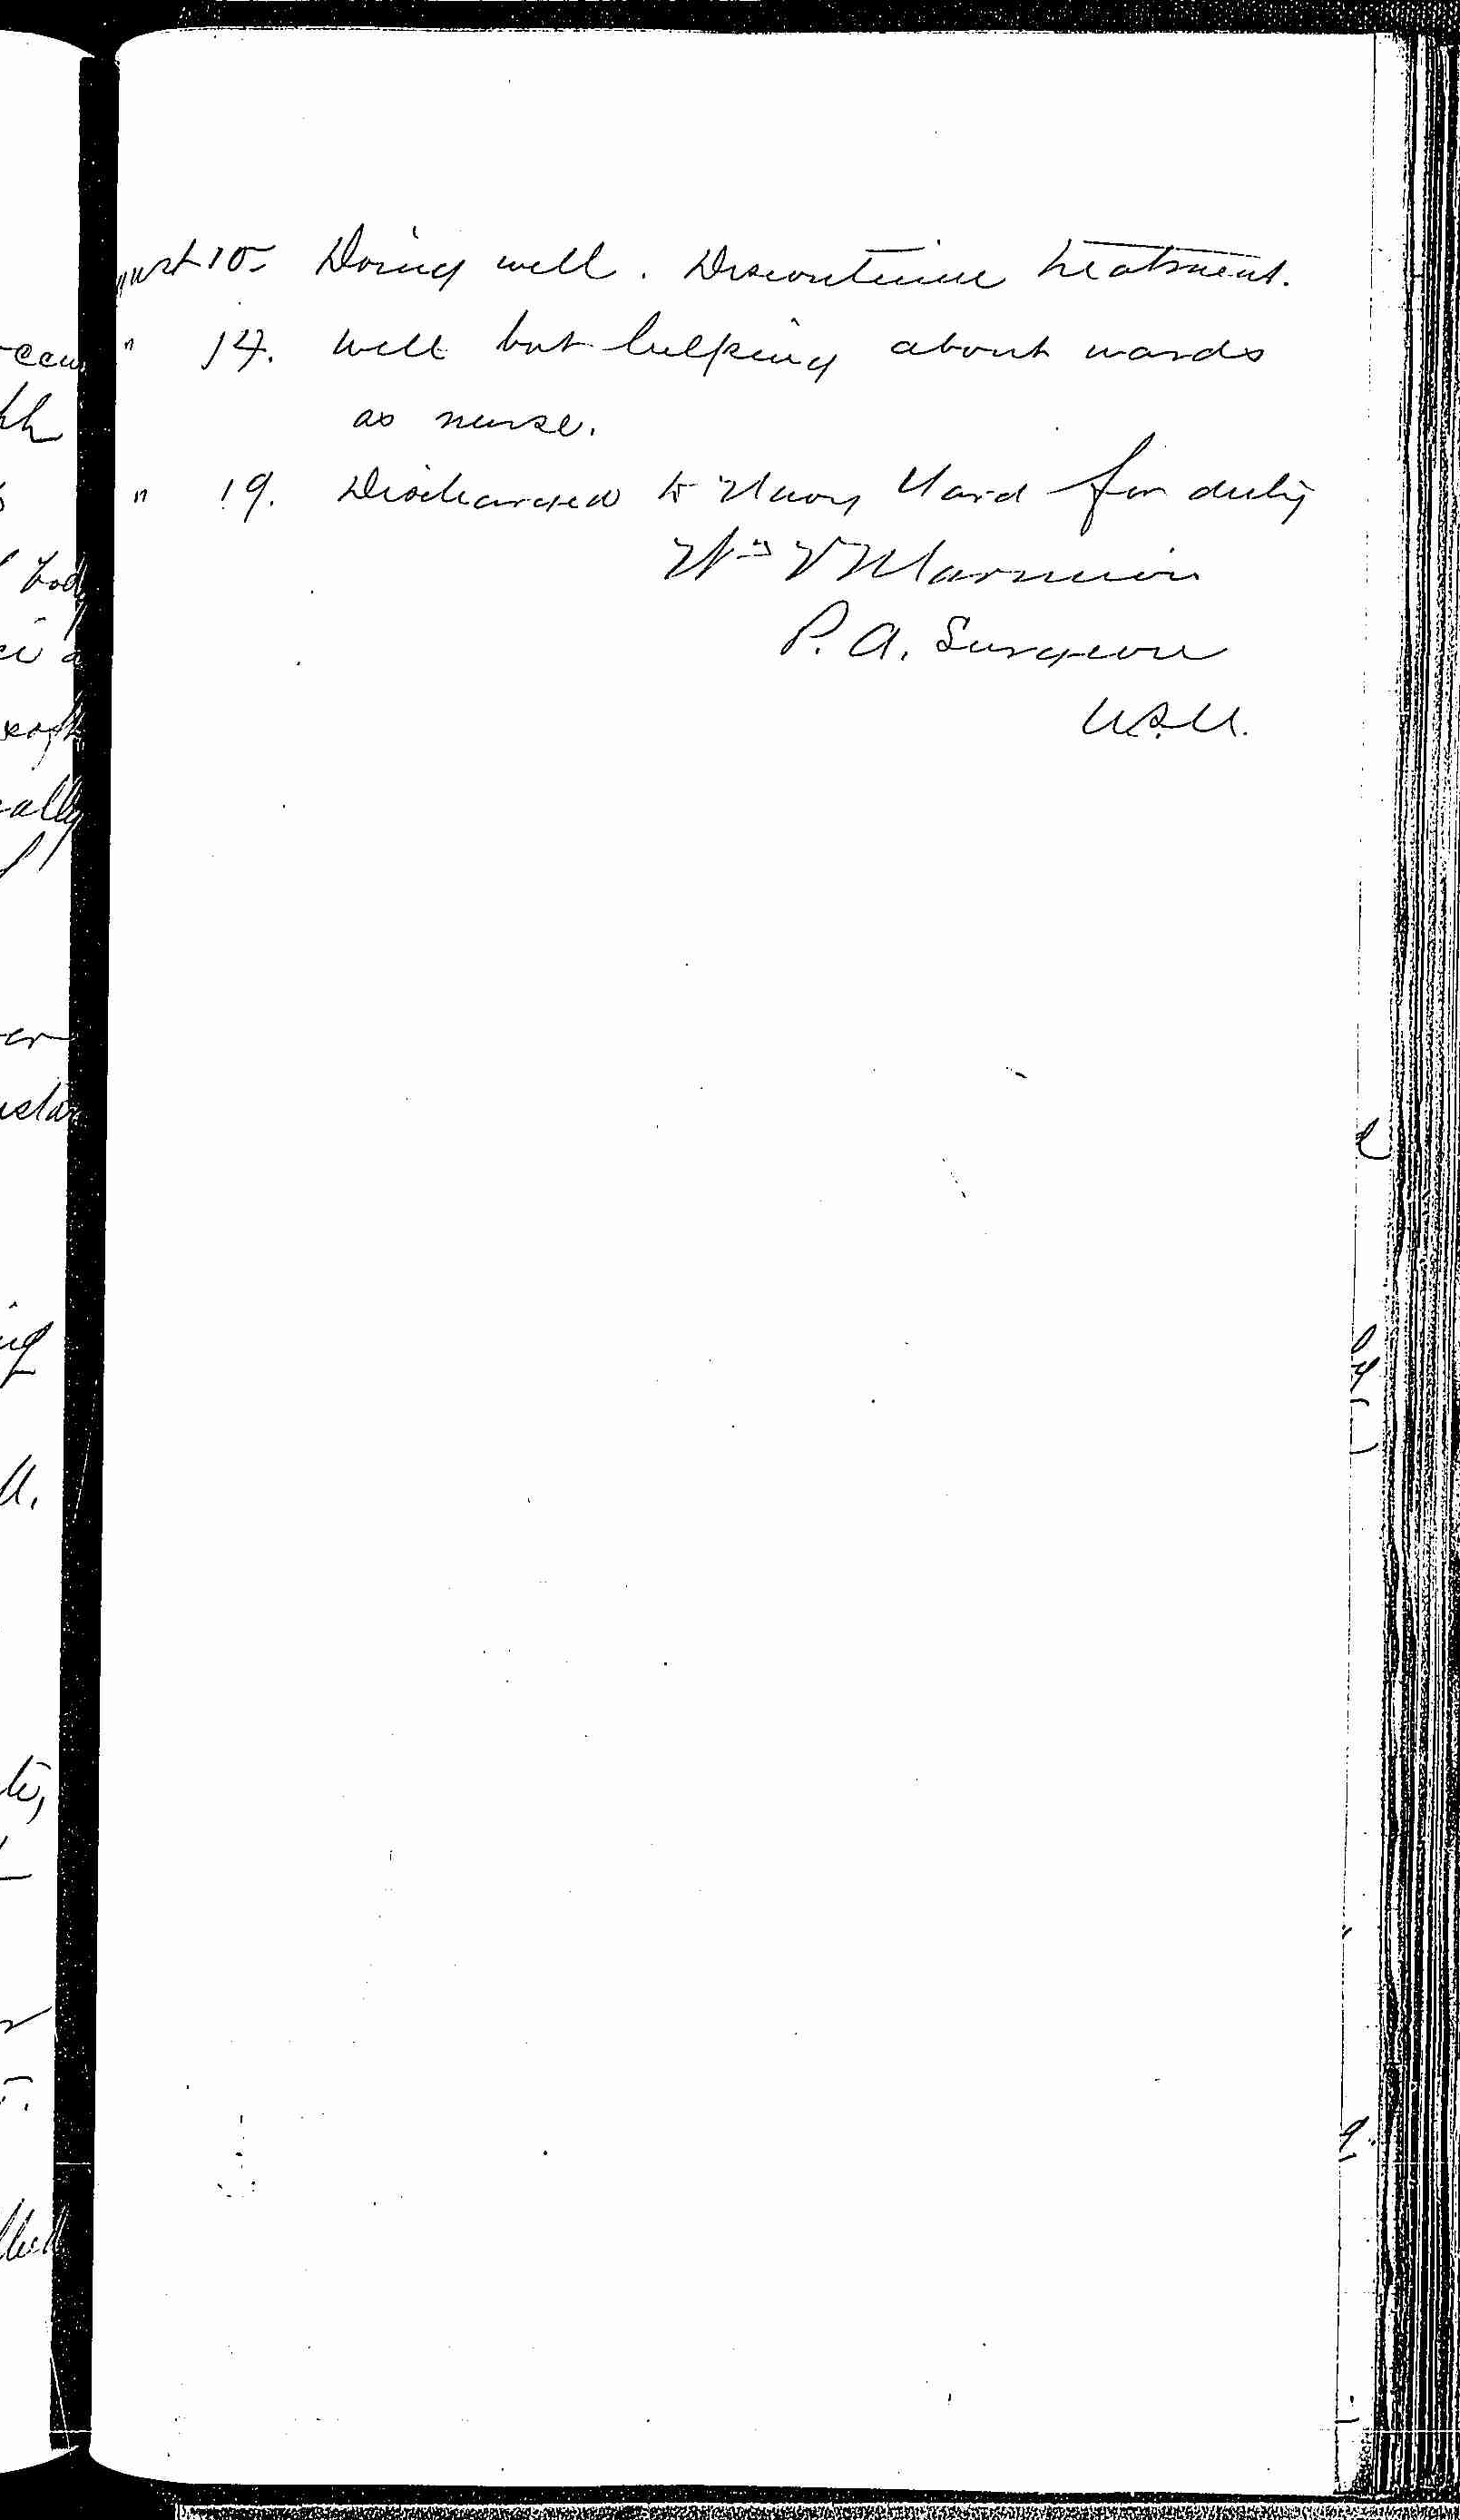 Entry for Richard Hearn (page 7 of 7) in the log Hospital Tickets and Case Papers - Naval Hospital - Washington, D.C. - 1868-69